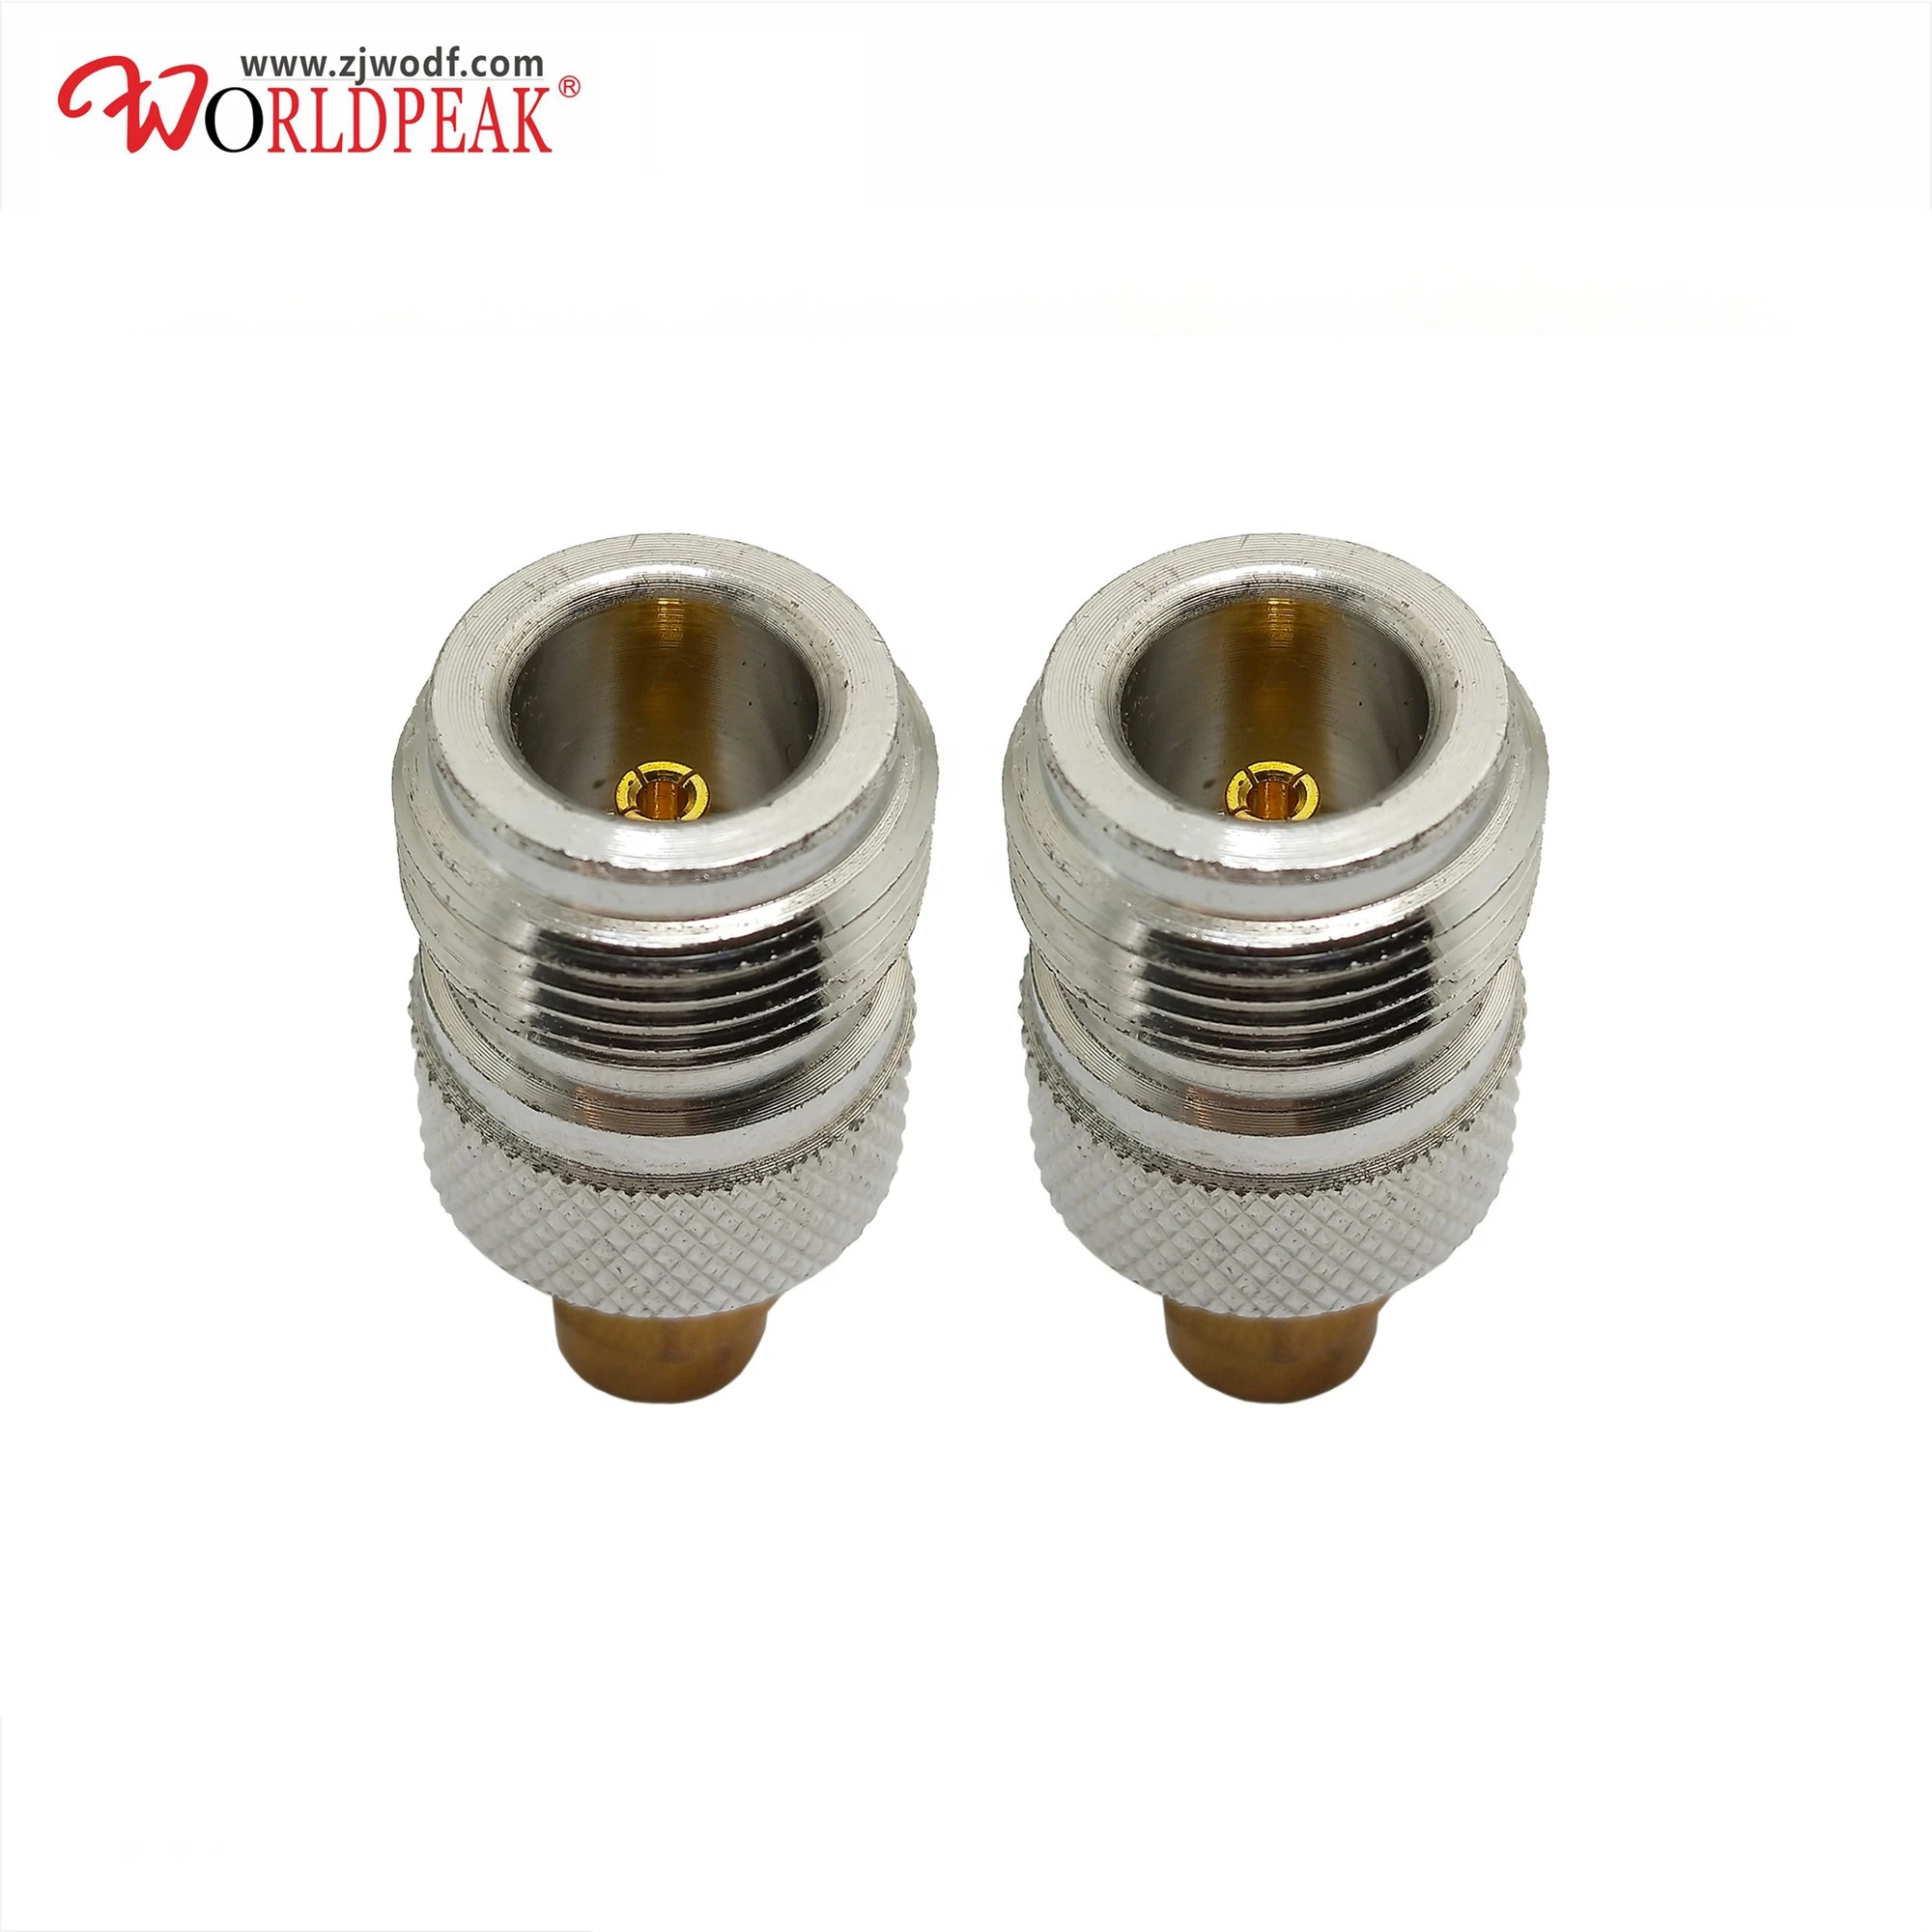 50Ohm  rf Coaxial Connector N Female to RP-SMA rp-sma Type Male Plug Adapter